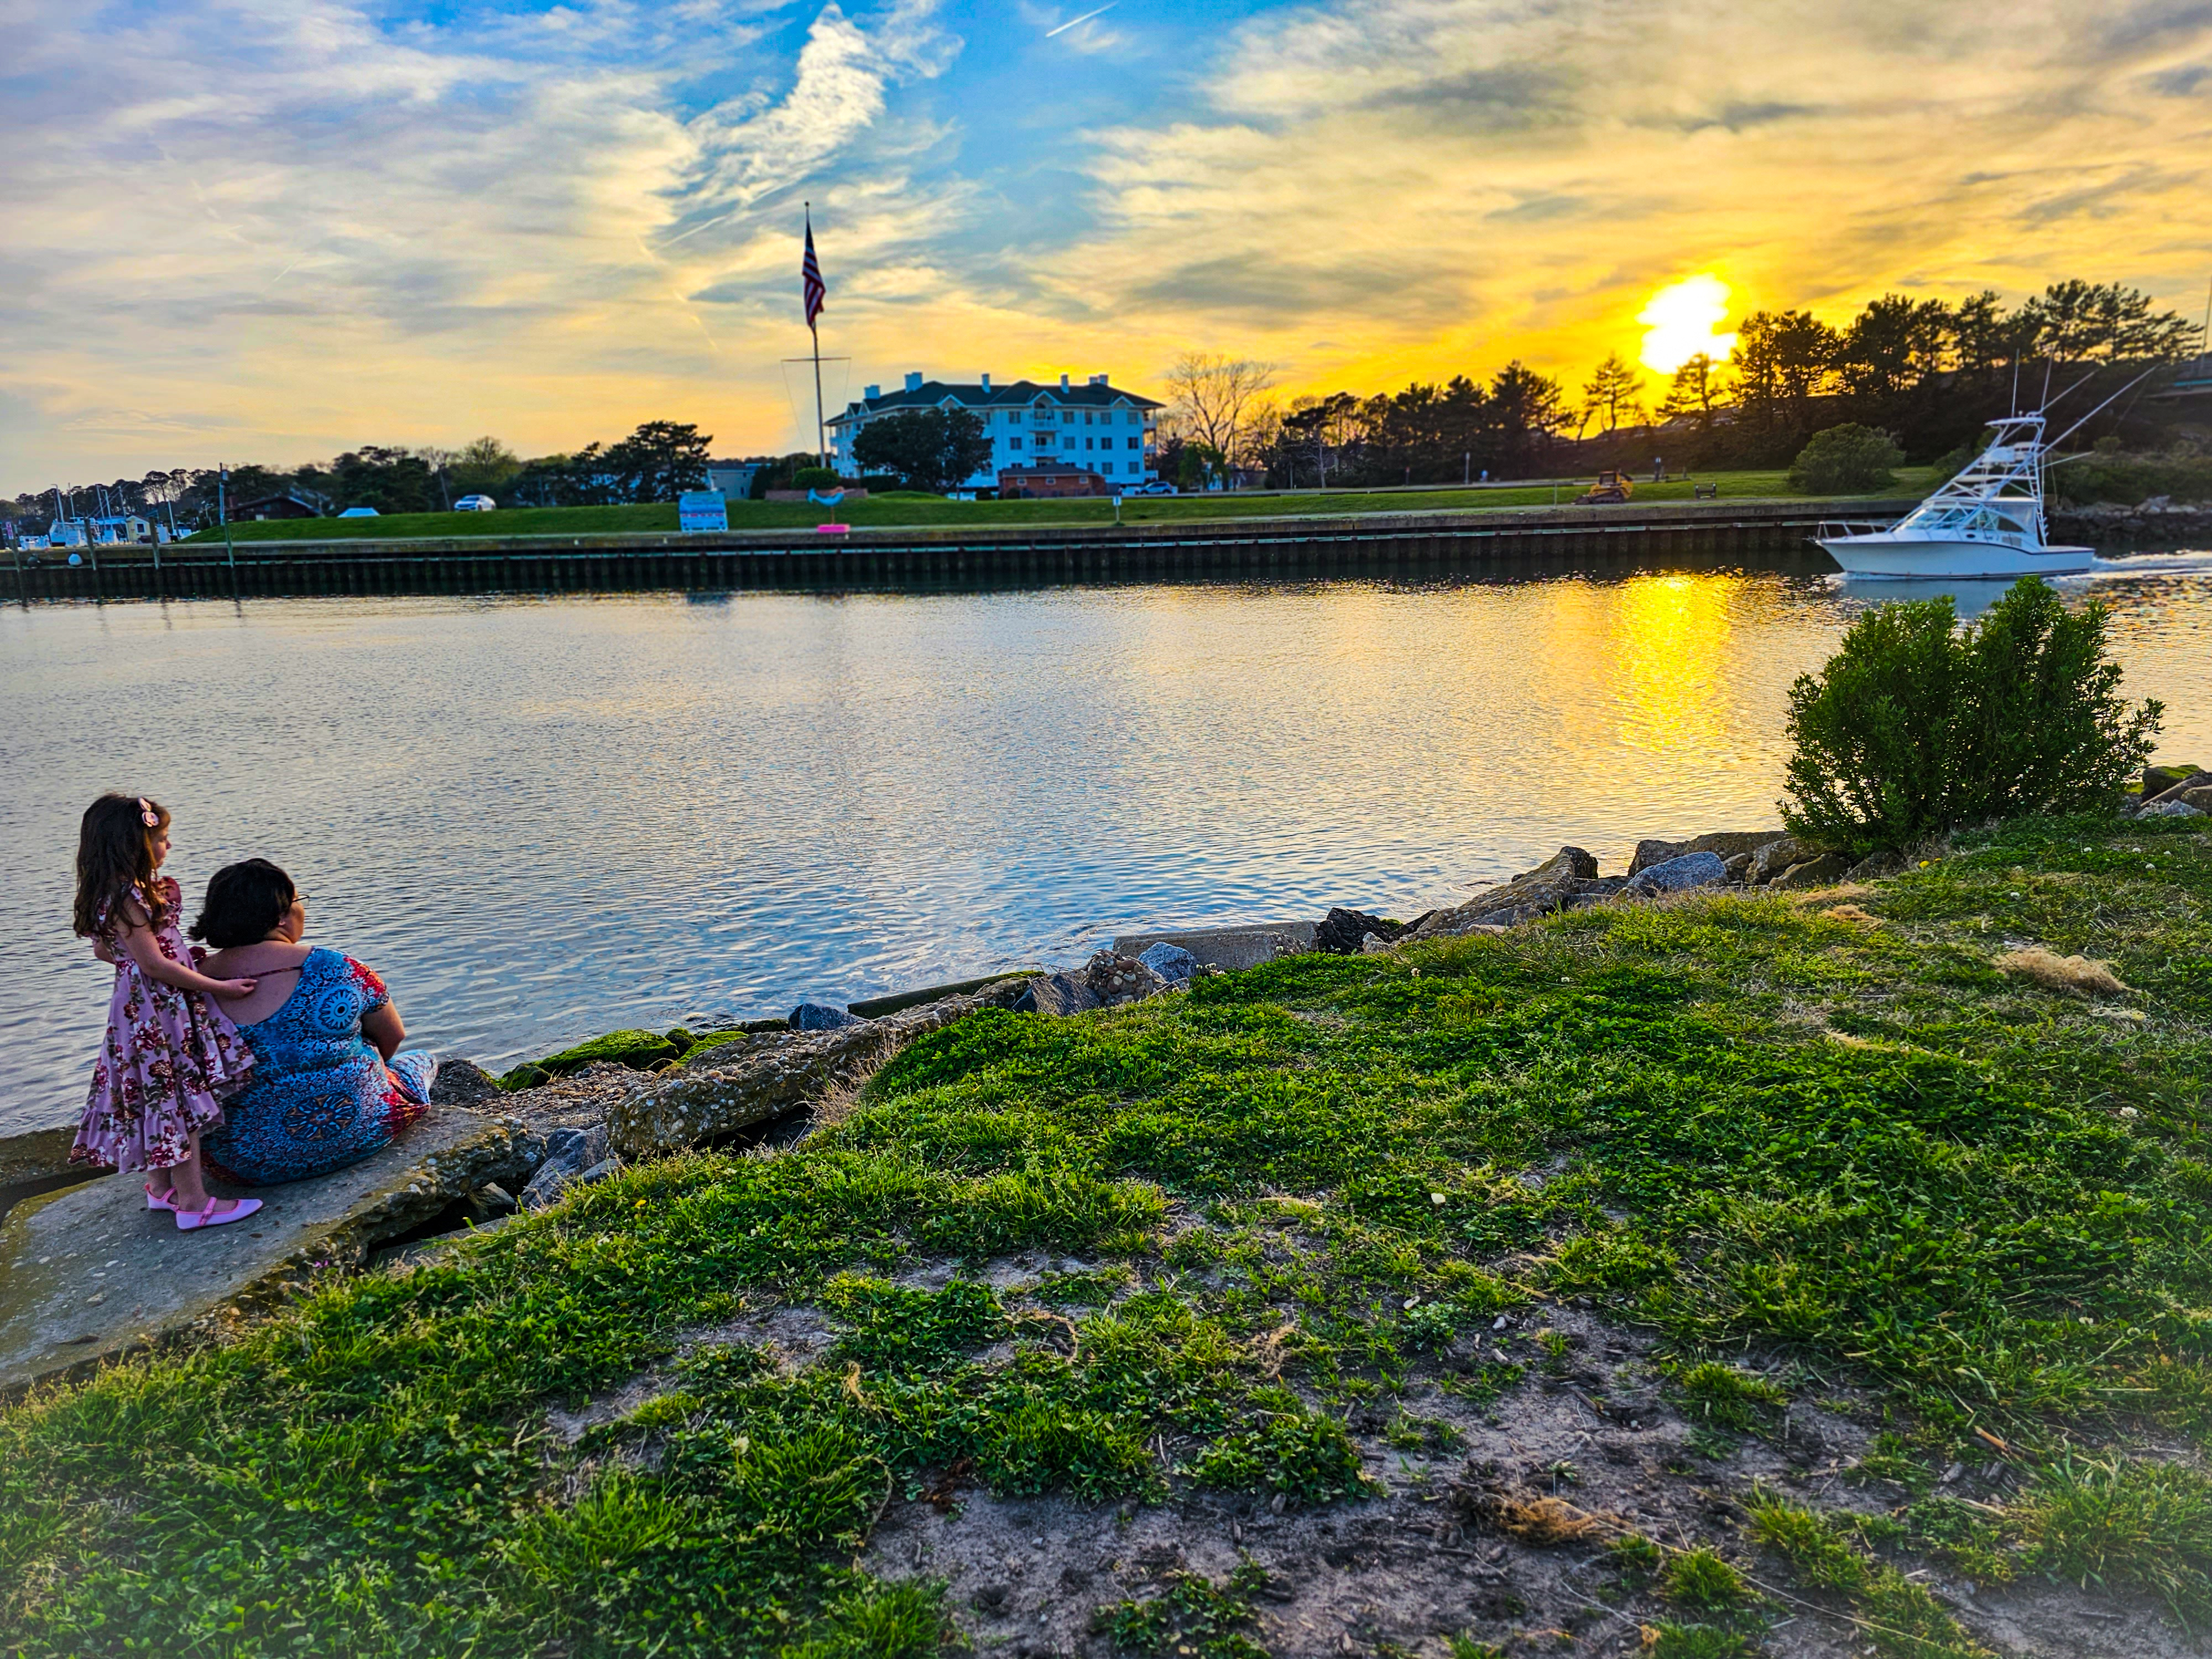 Watching the sunset by Gromett Park at the end of ...